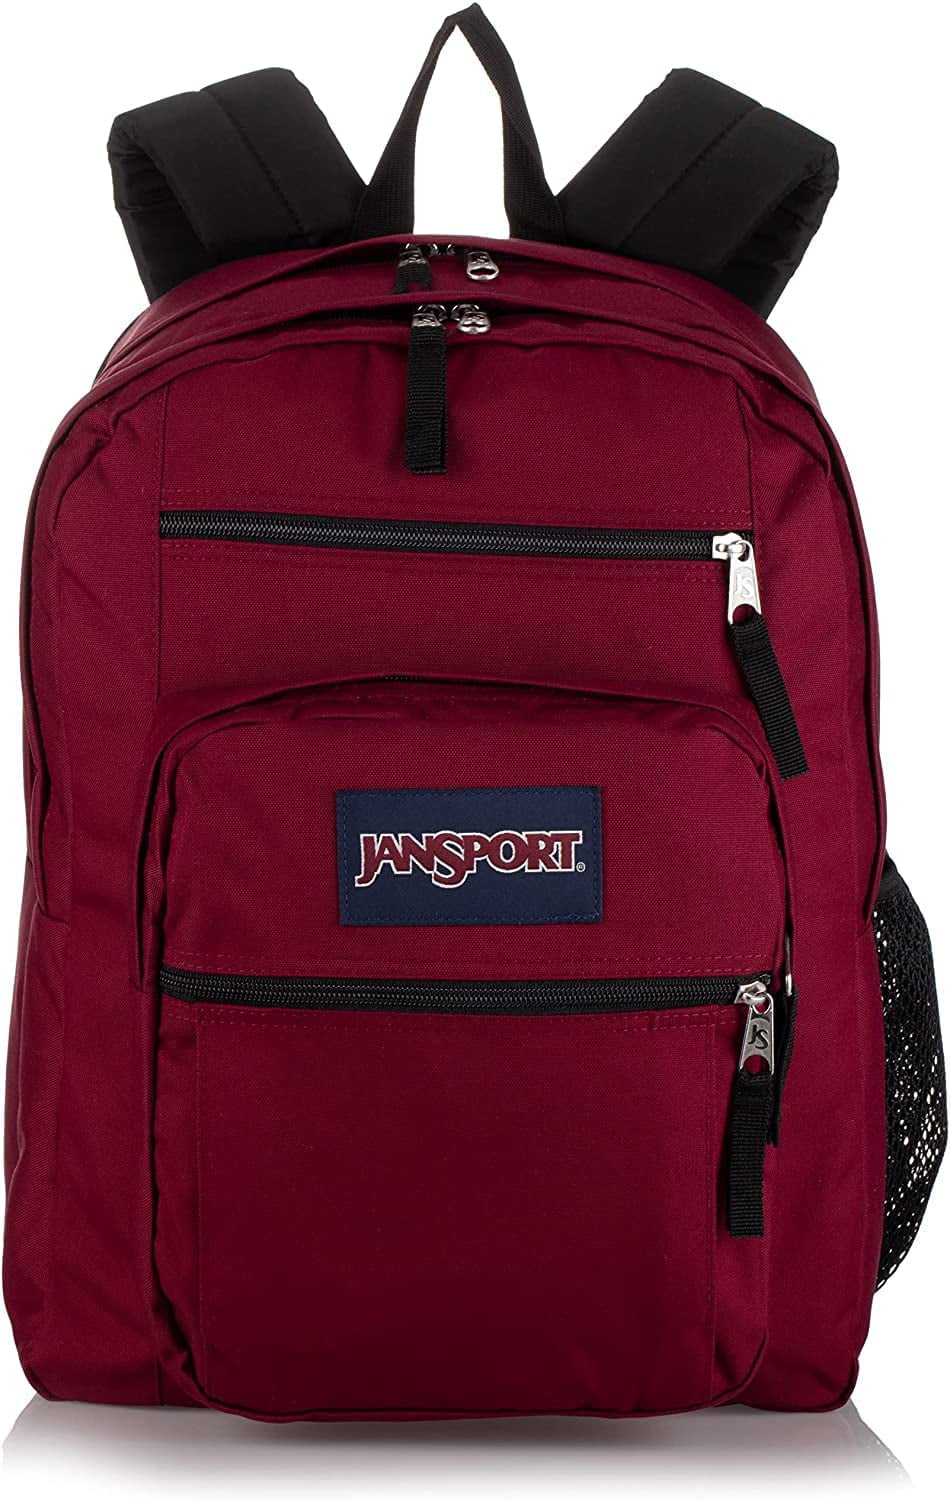 Laptop Student - JanSport School, 15-Inch Or Compartment(RUSSET RED) Travel, Big Bookbag With Backpack Work